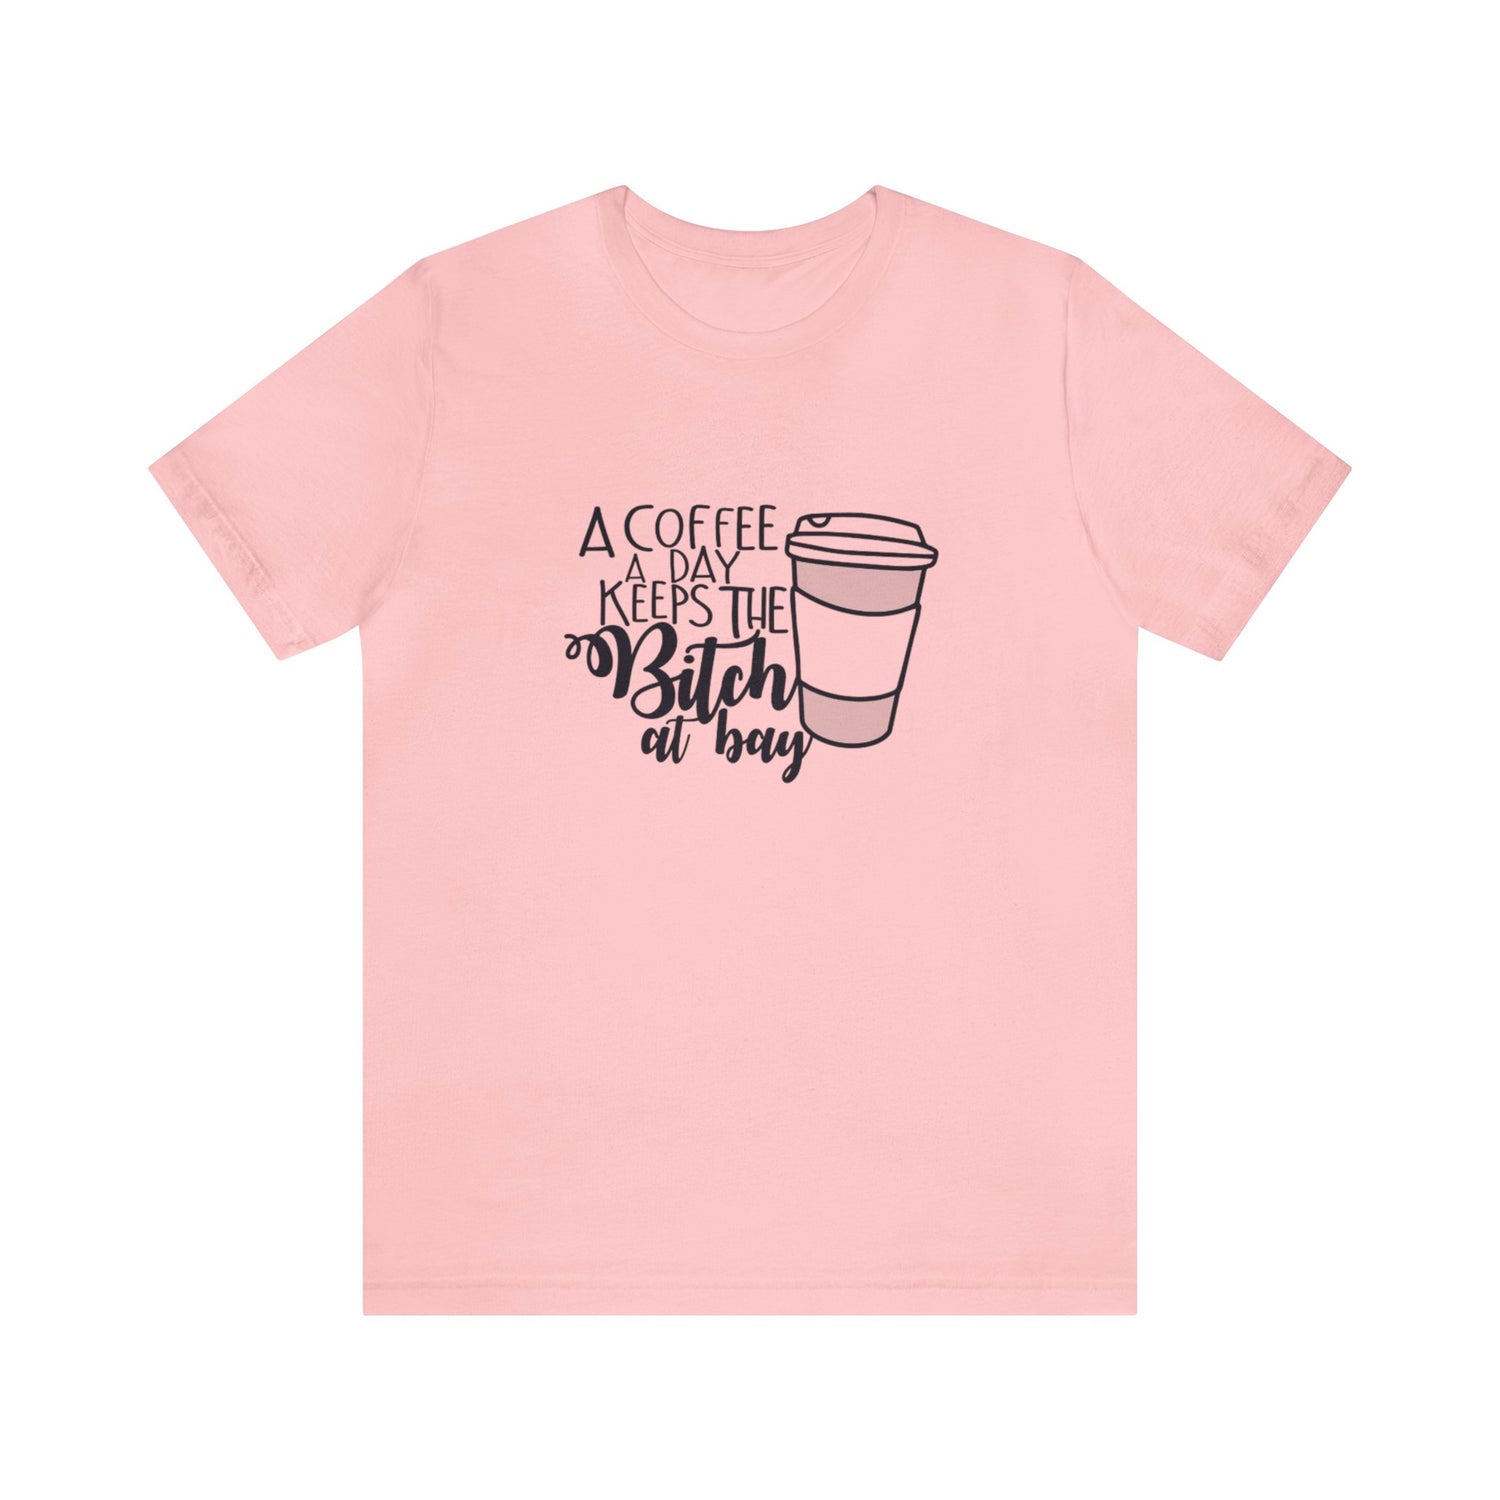 A Coffee a Day Keeps the B!tch at Bay Jersey Short Sleeve Tee